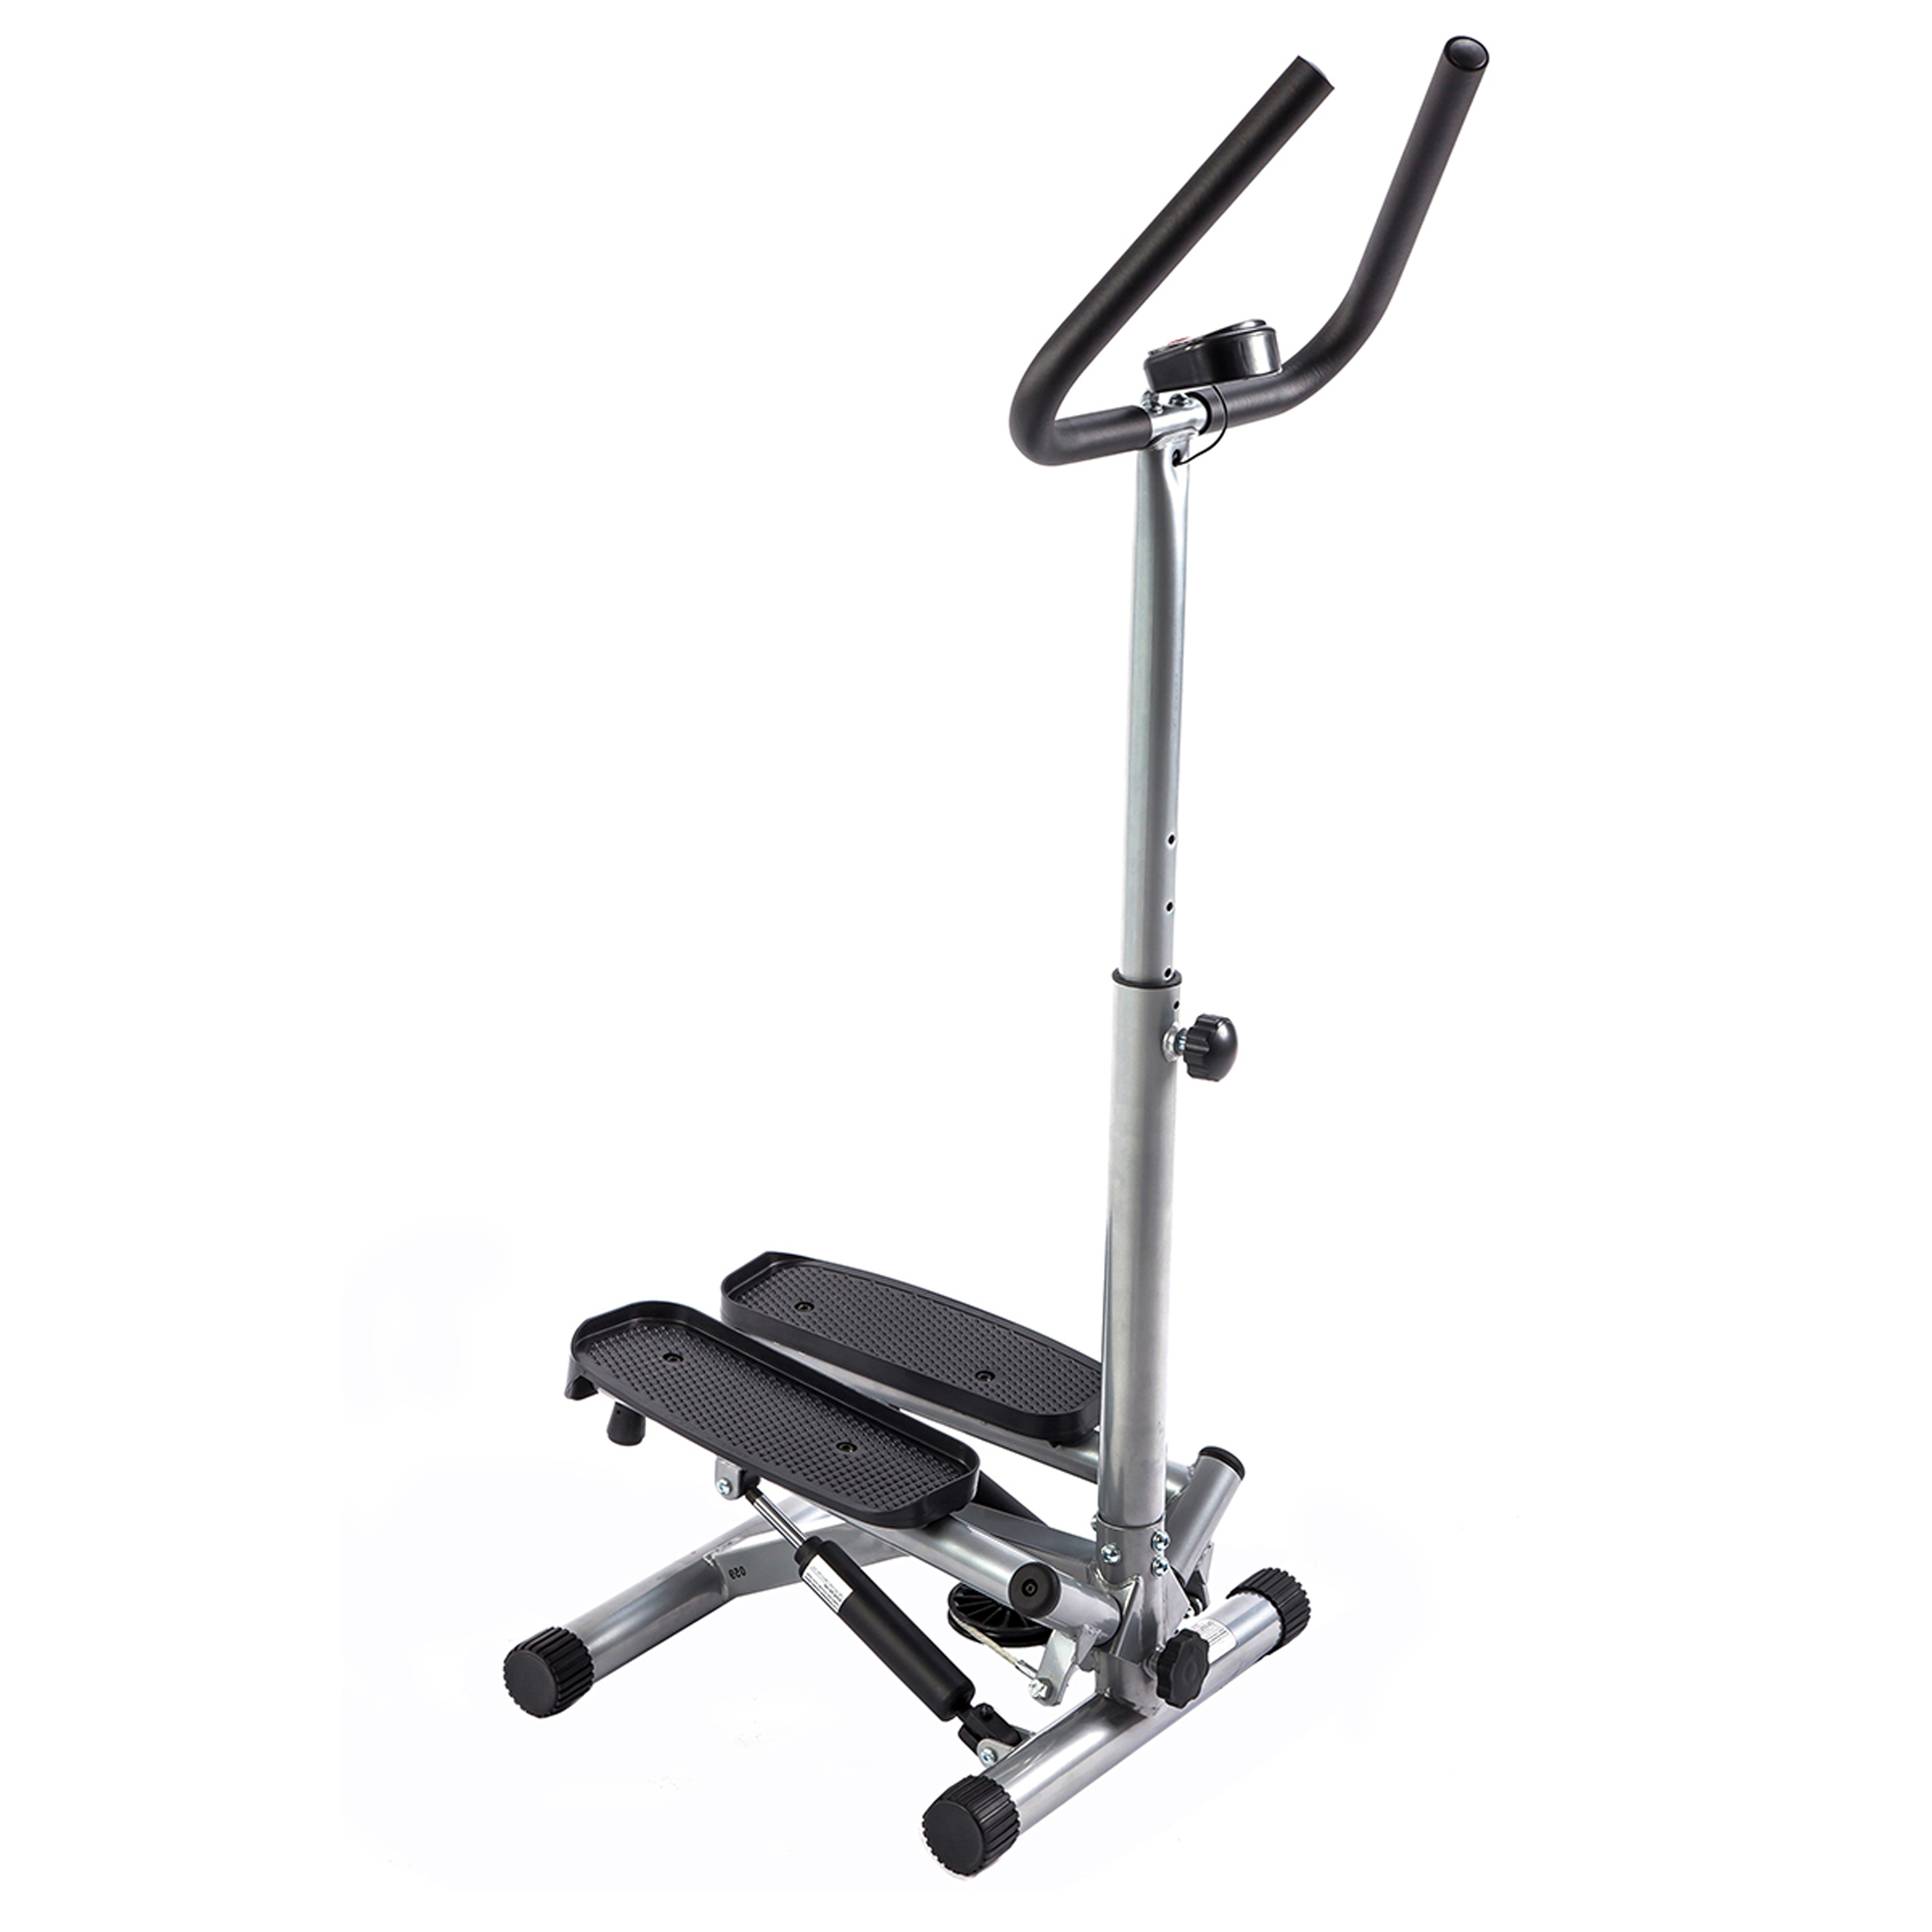 Sunny Health & Fitness Twist Stair Stepper Machine with Handlebar for Total Body Toning and LCD Monitor, NO. 059 - image 3 of 12